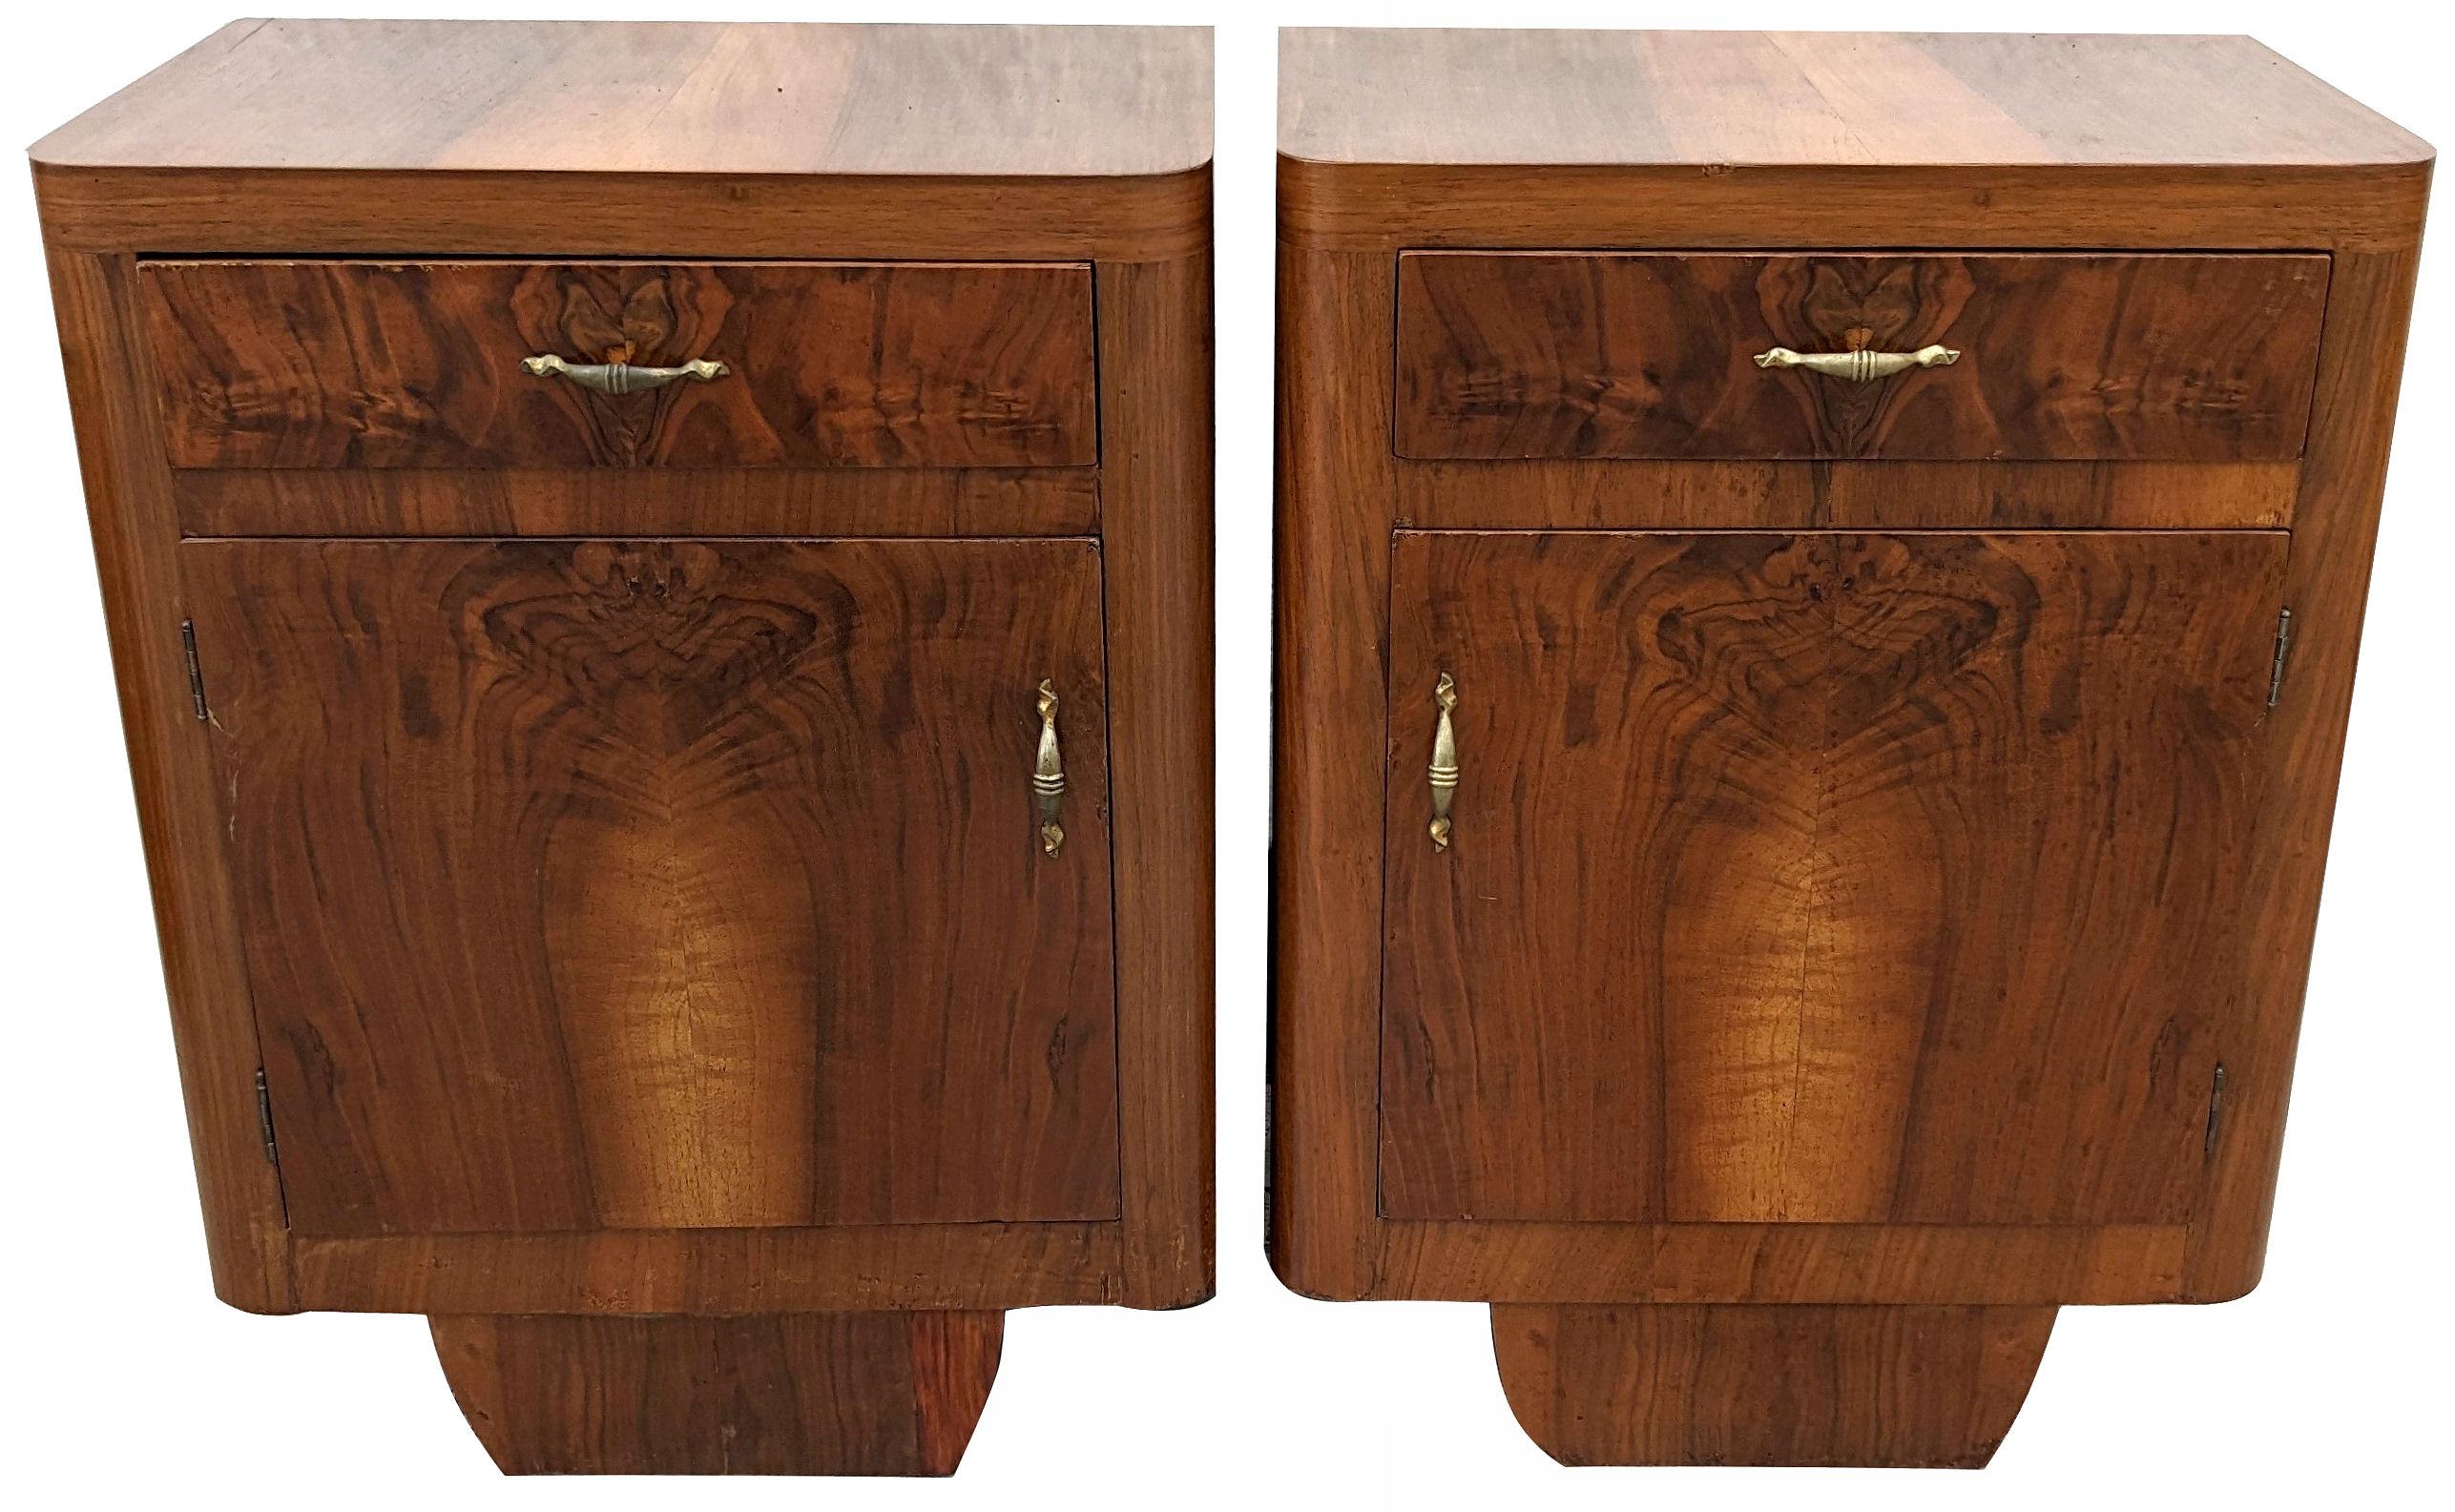 A rare opportunity to acquire beautifully styled and totally original Art Deco bedside tables. Originating from Italy and dating to the early 1930's they fill both the highly desired shape of Art Deco and sort after the luscious veneers of figured